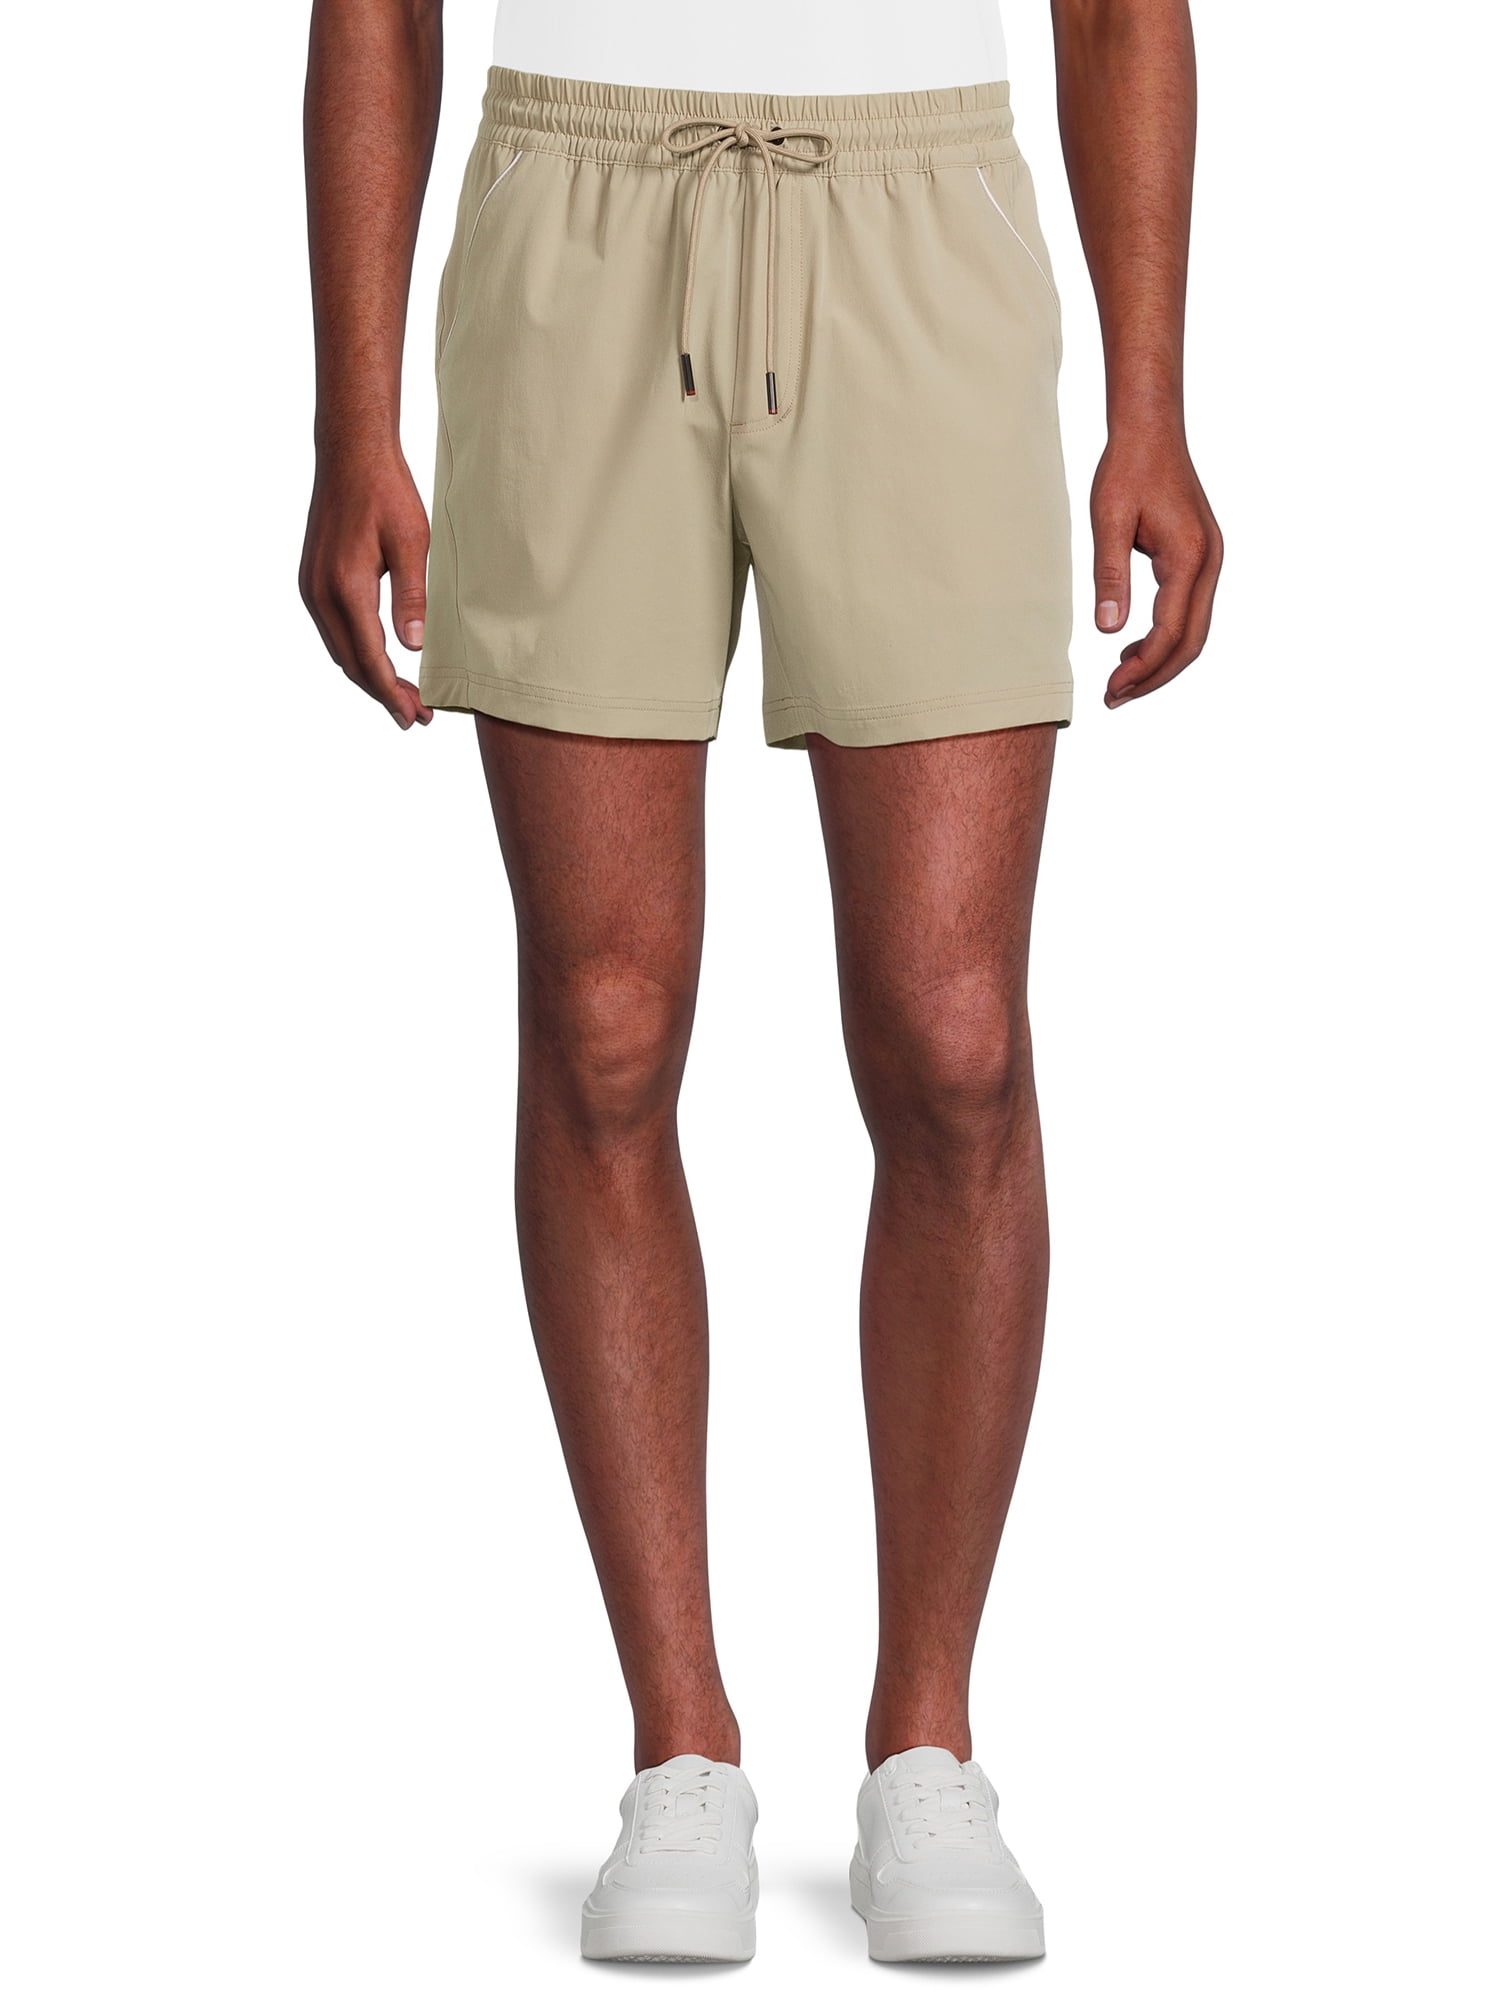 Athletic Works Men's and Big Men's Retro Woven Shorts, 7